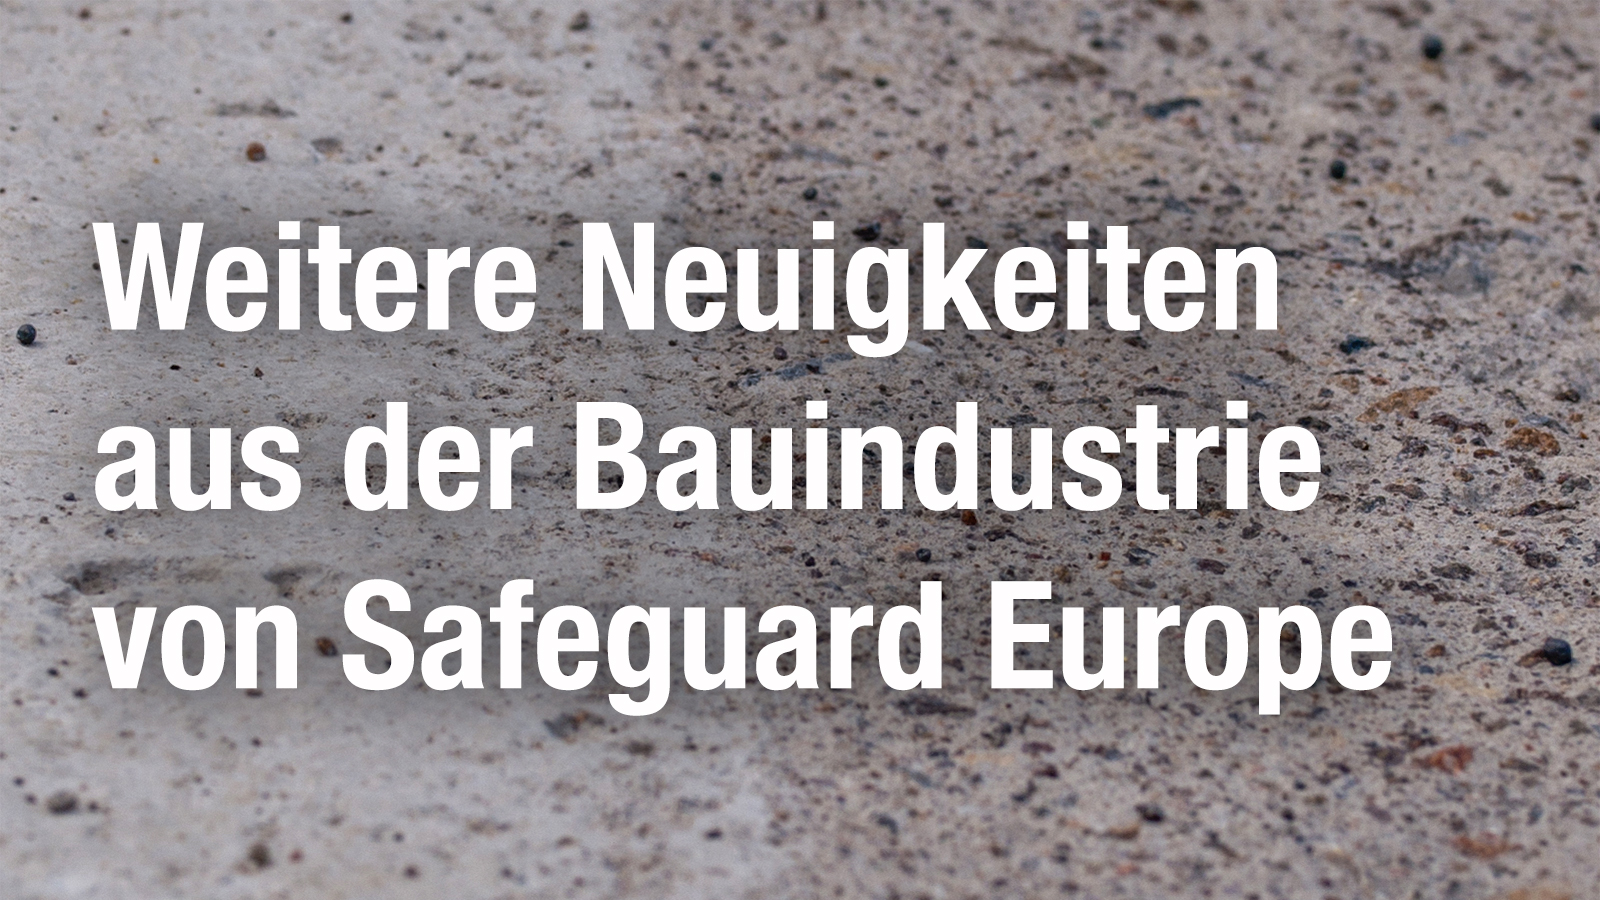 Read More Construction Industry News from Safeguard Europe